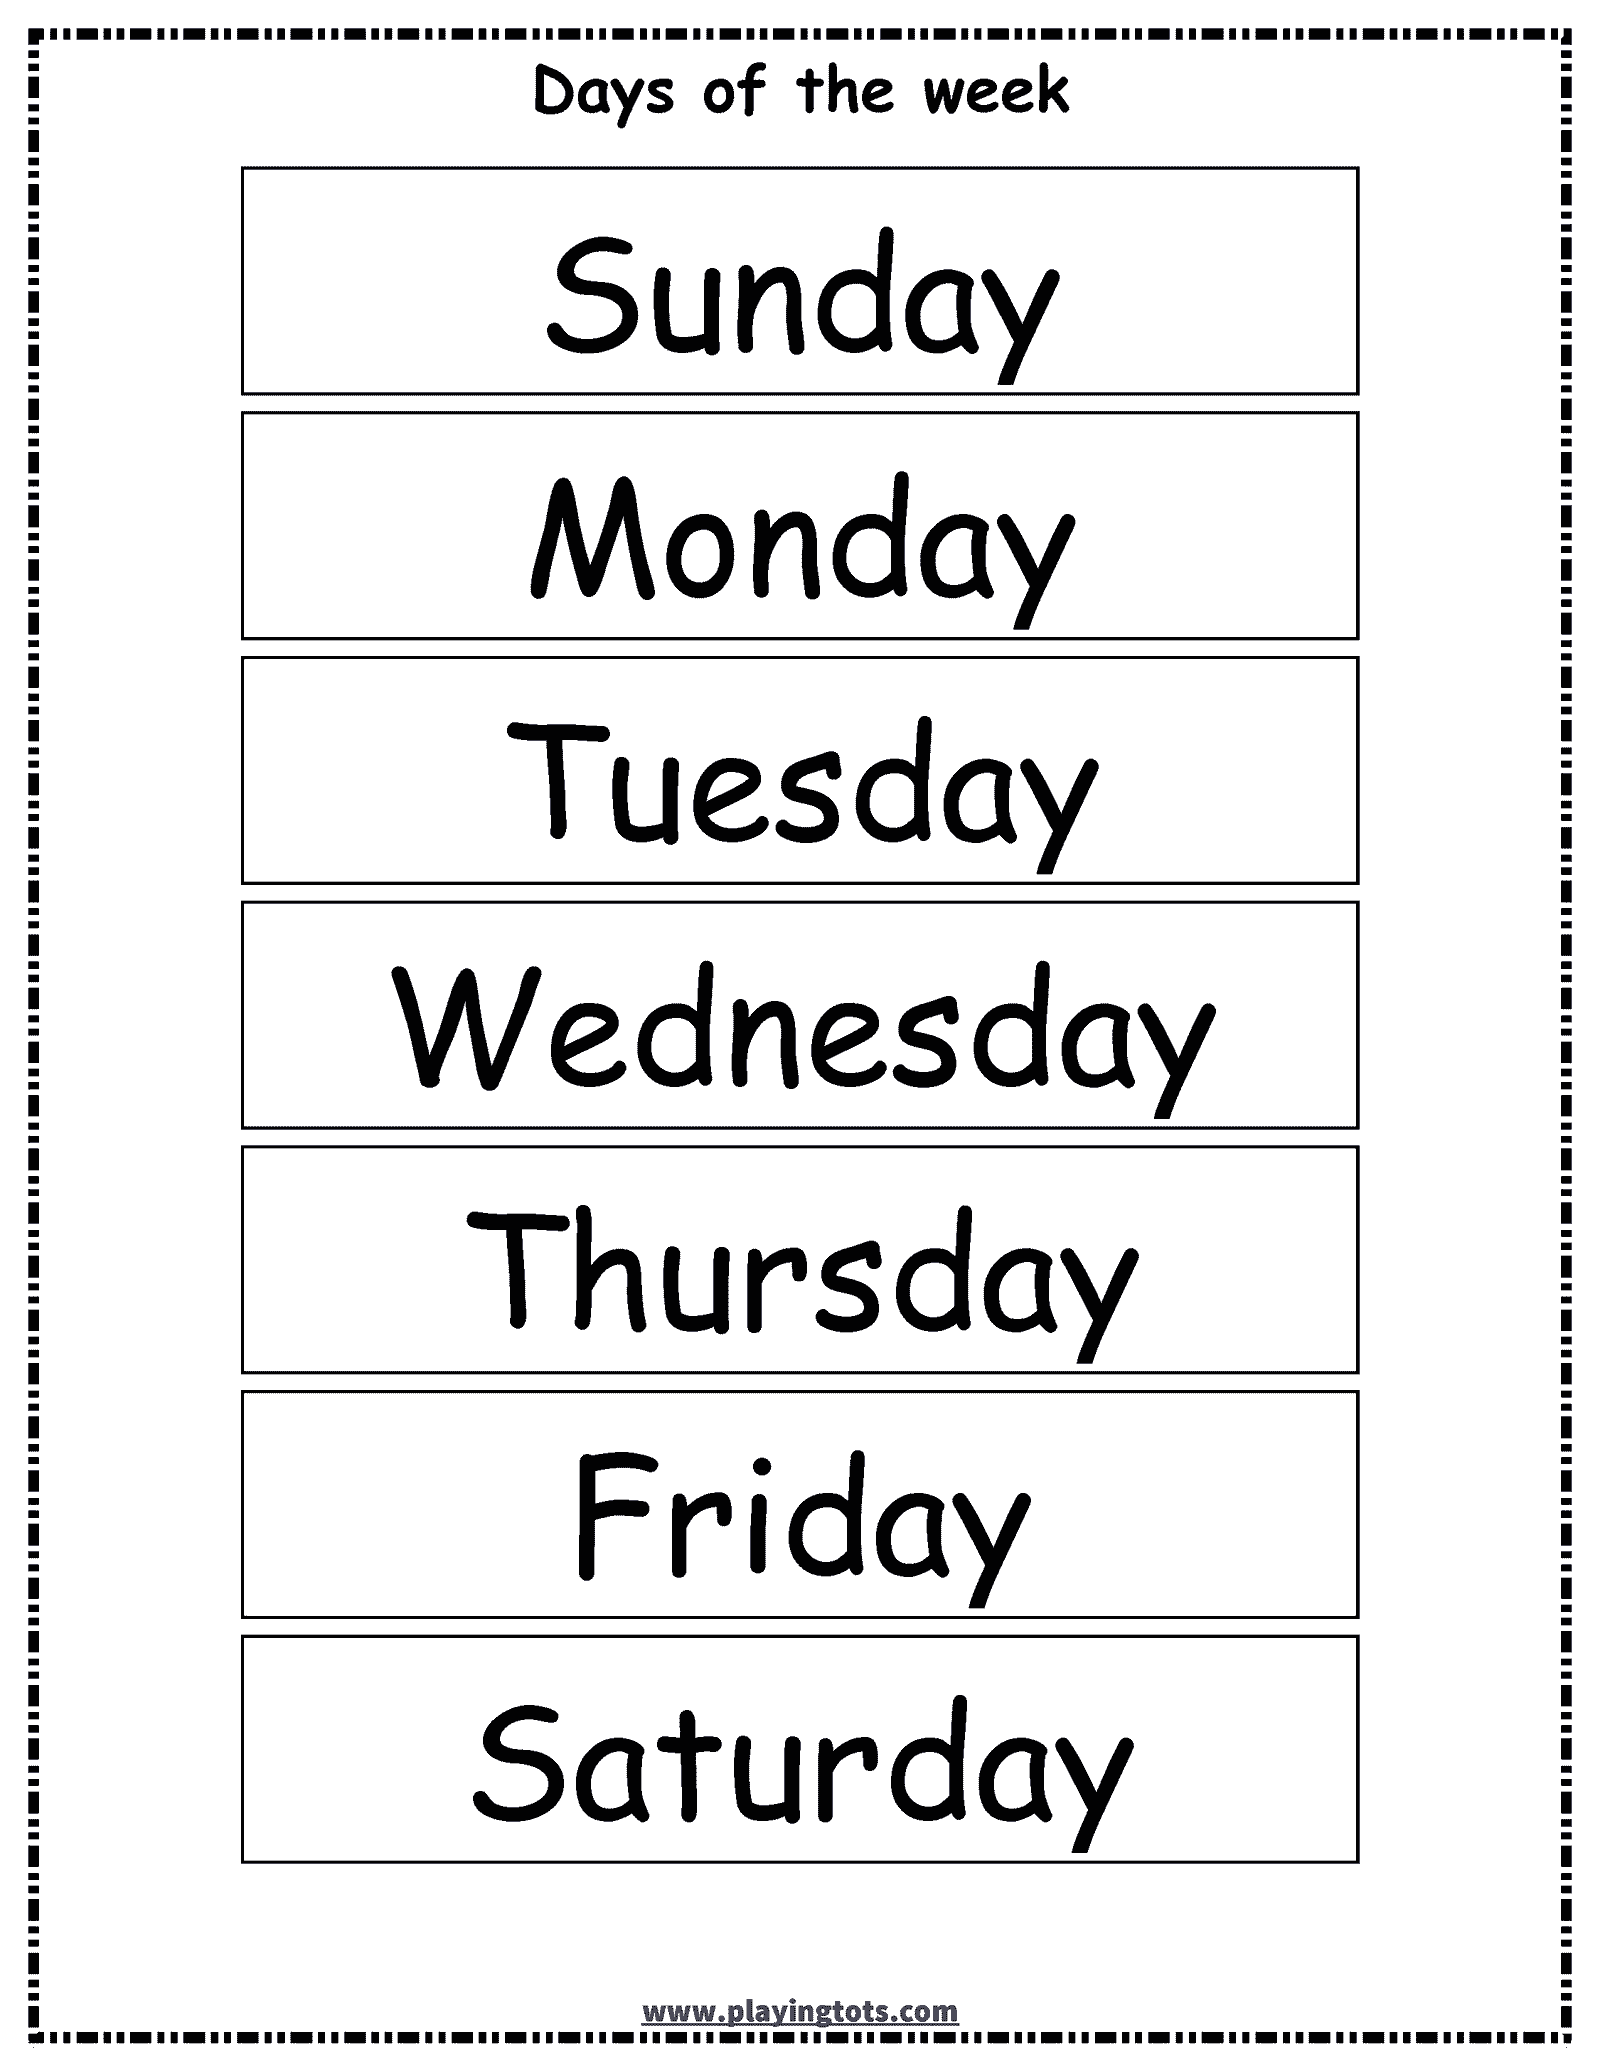 days-of-the-week-chart-worksheets-worksheetscity